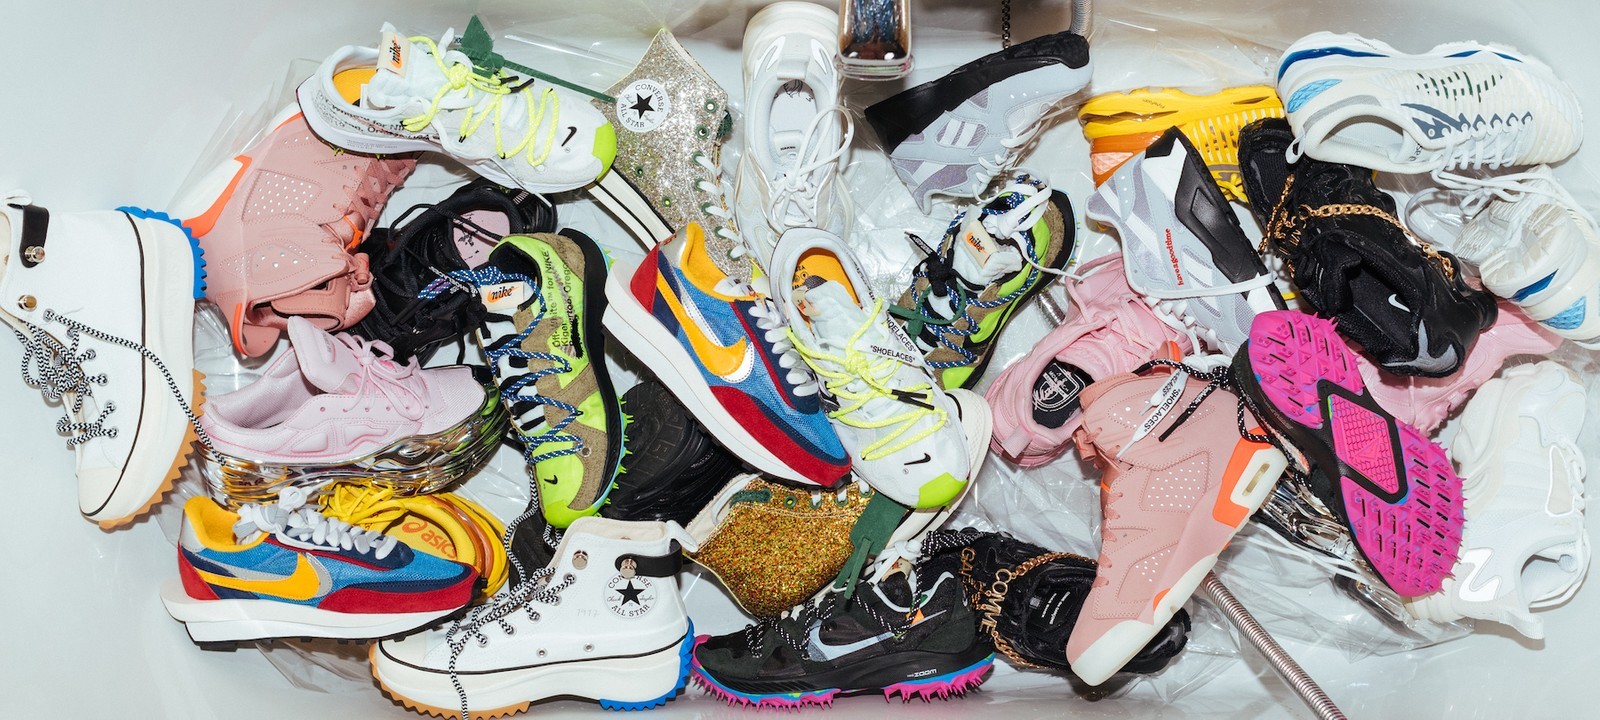 The massive sneakers market ranges from simple classics to luxury and stylish footwear, and is dominated by sportswear giants Nike, Adidas and Reebok. Photos: HYPEBAE